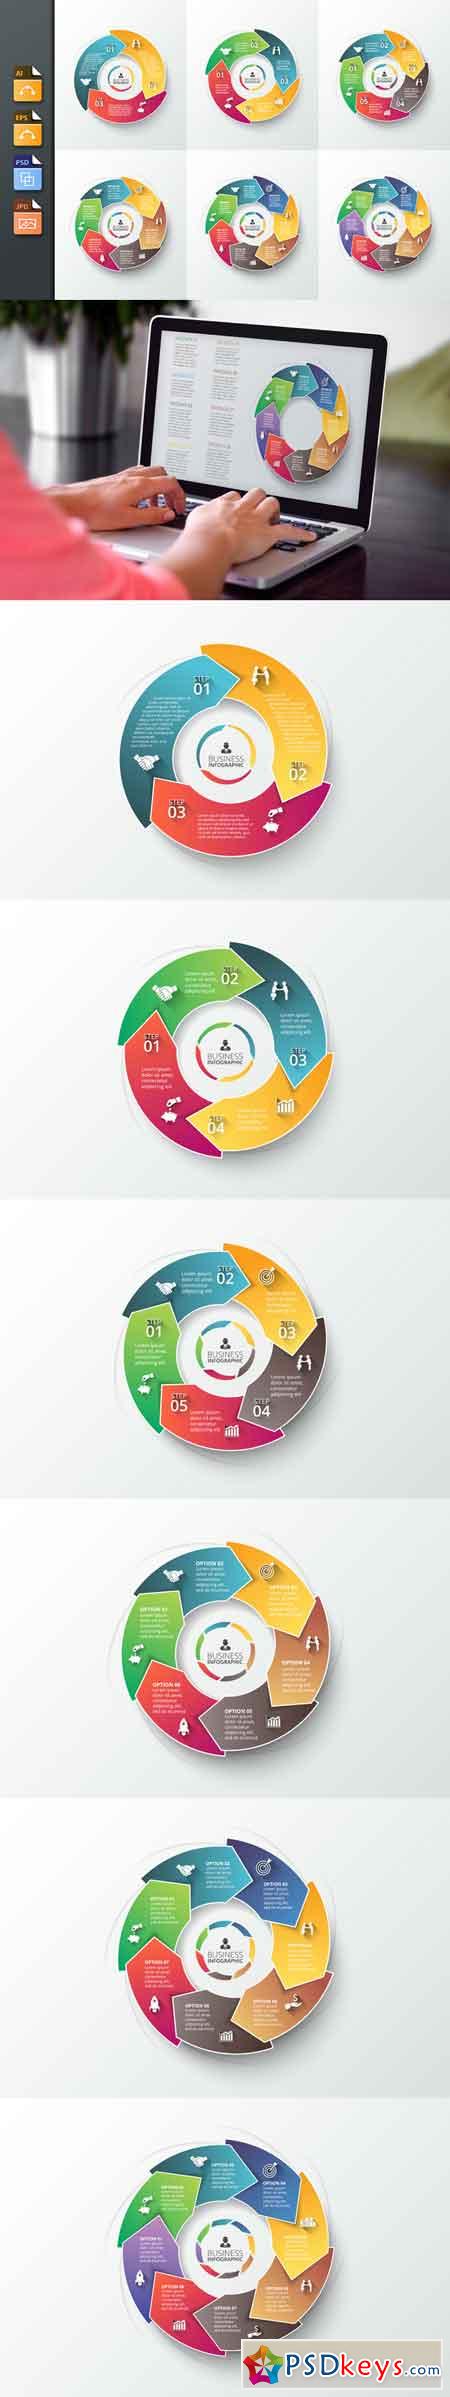 Arrows business infographic template 608990